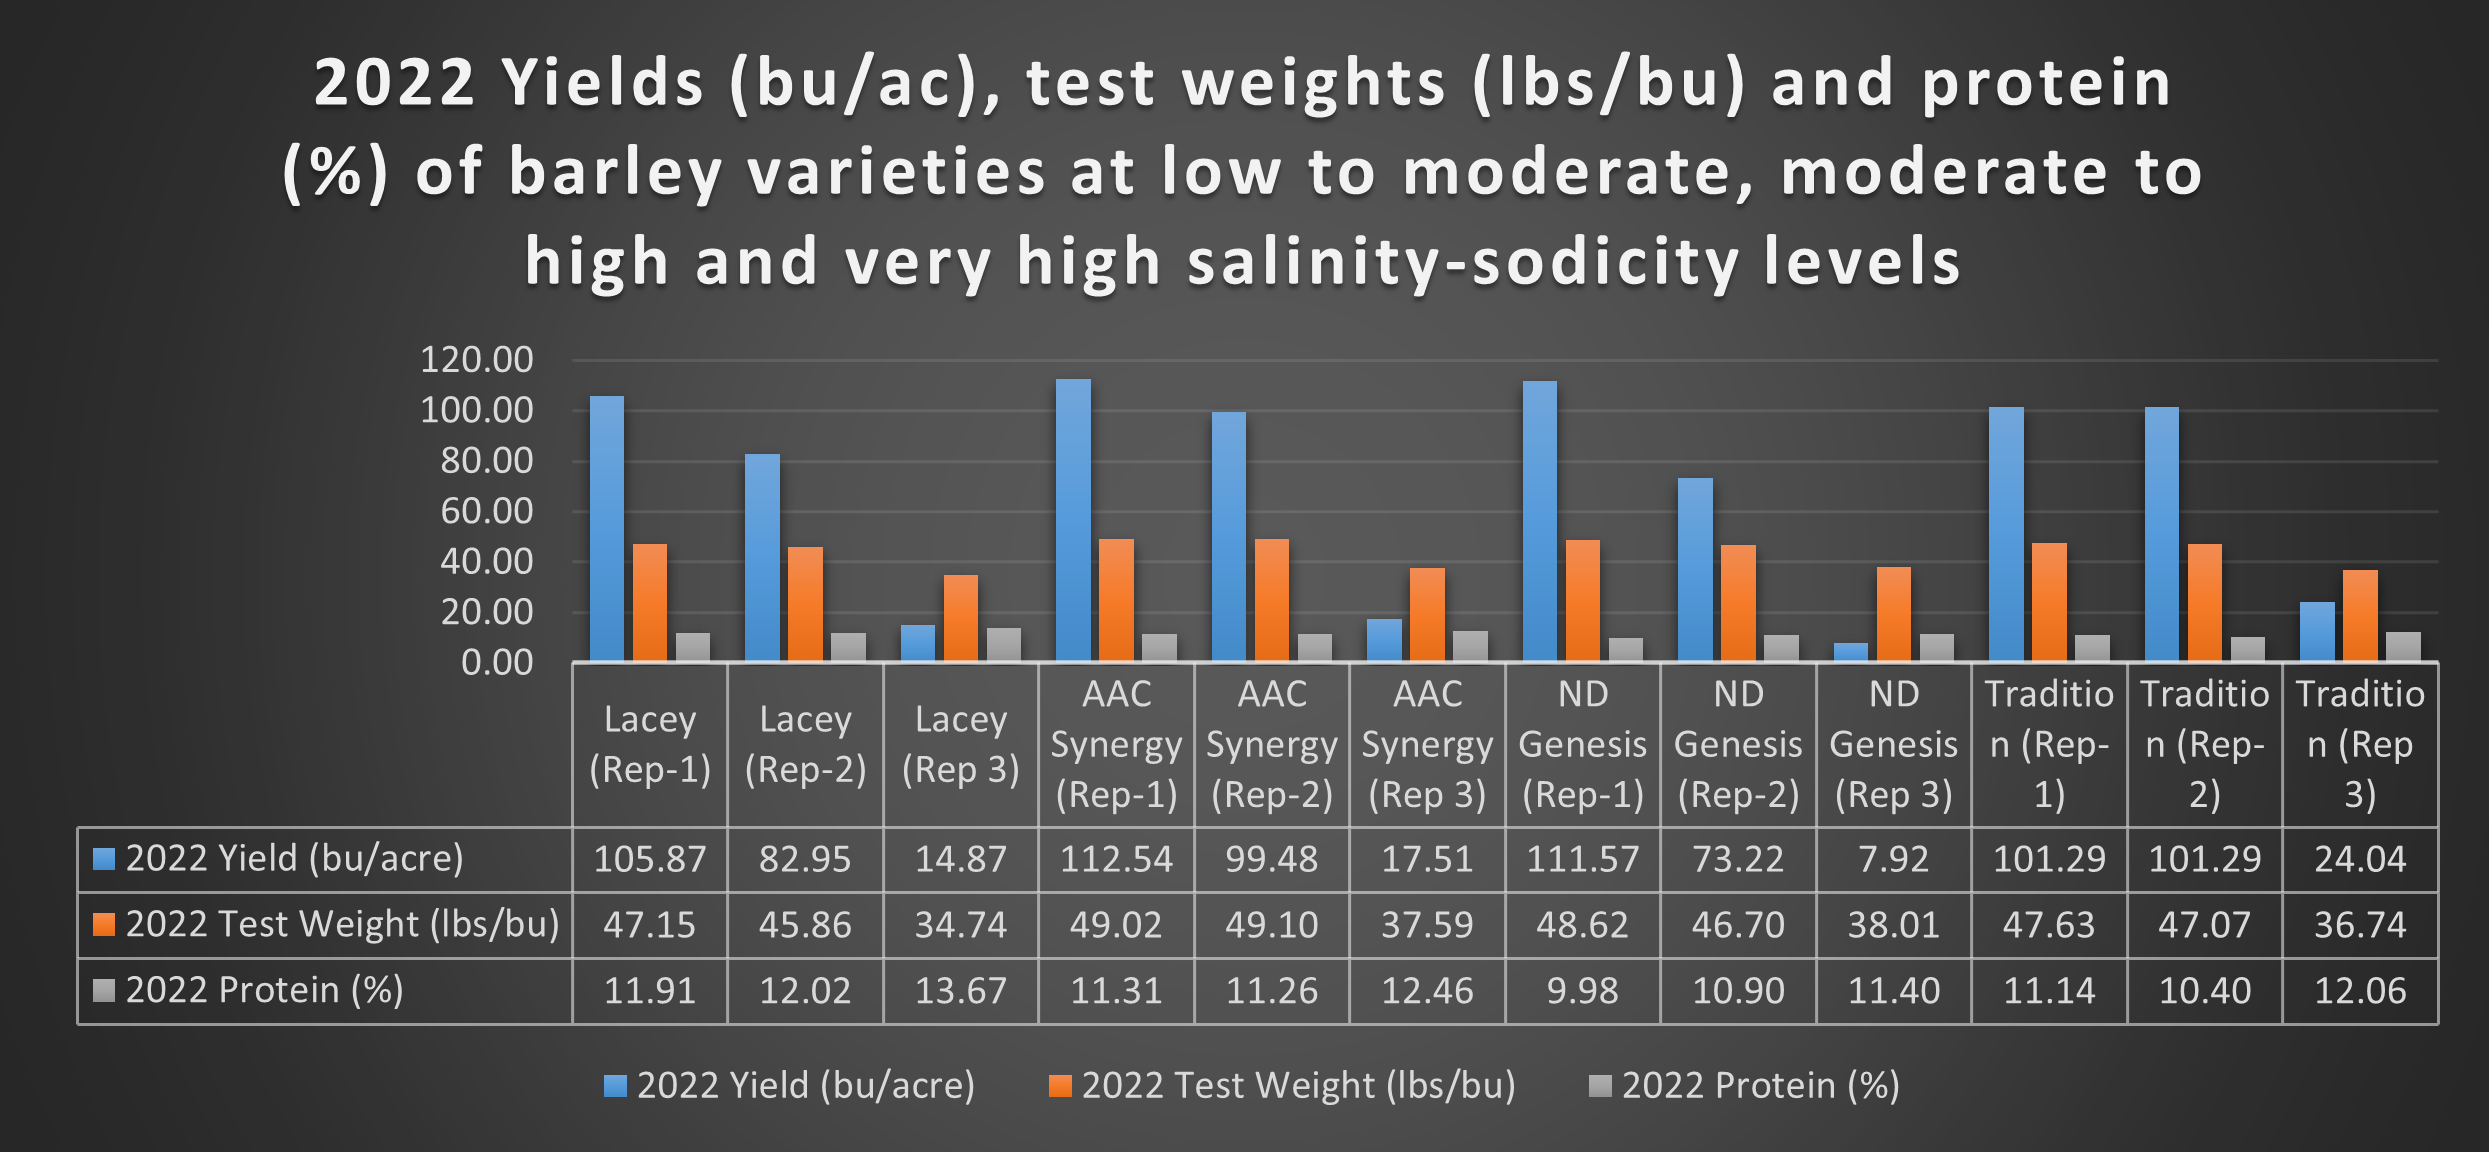 . 2022 yields (bushels/acre), test weights (lbs./bushel) and protein (%) of the four barley varieties for replications 1, 2 and 3. 